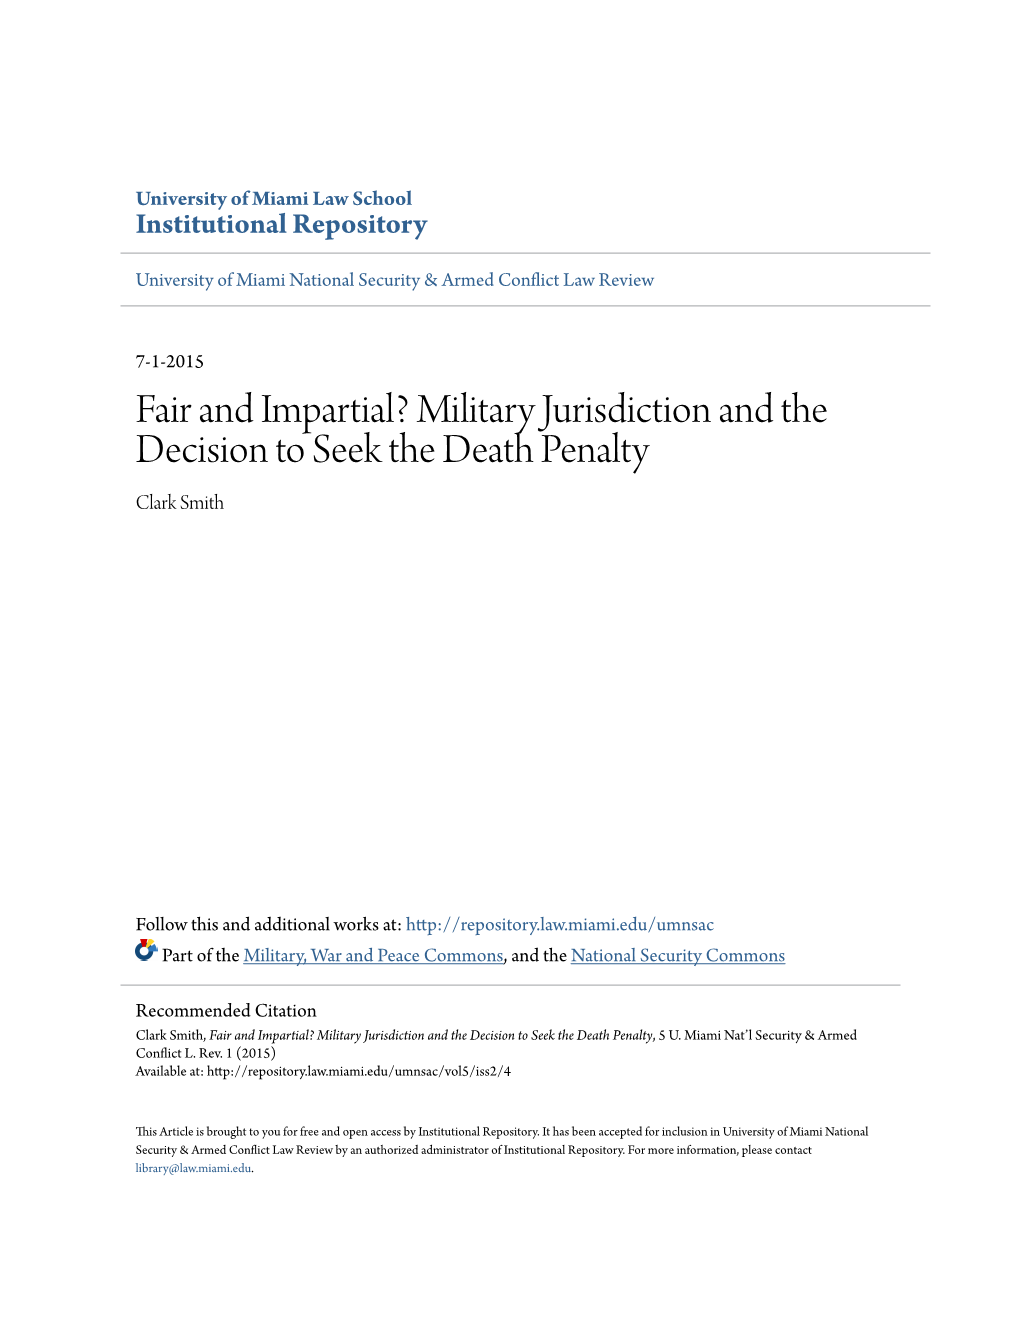 Military Jurisdiction and the Decision to Seek the Death Penalty Clark Smith